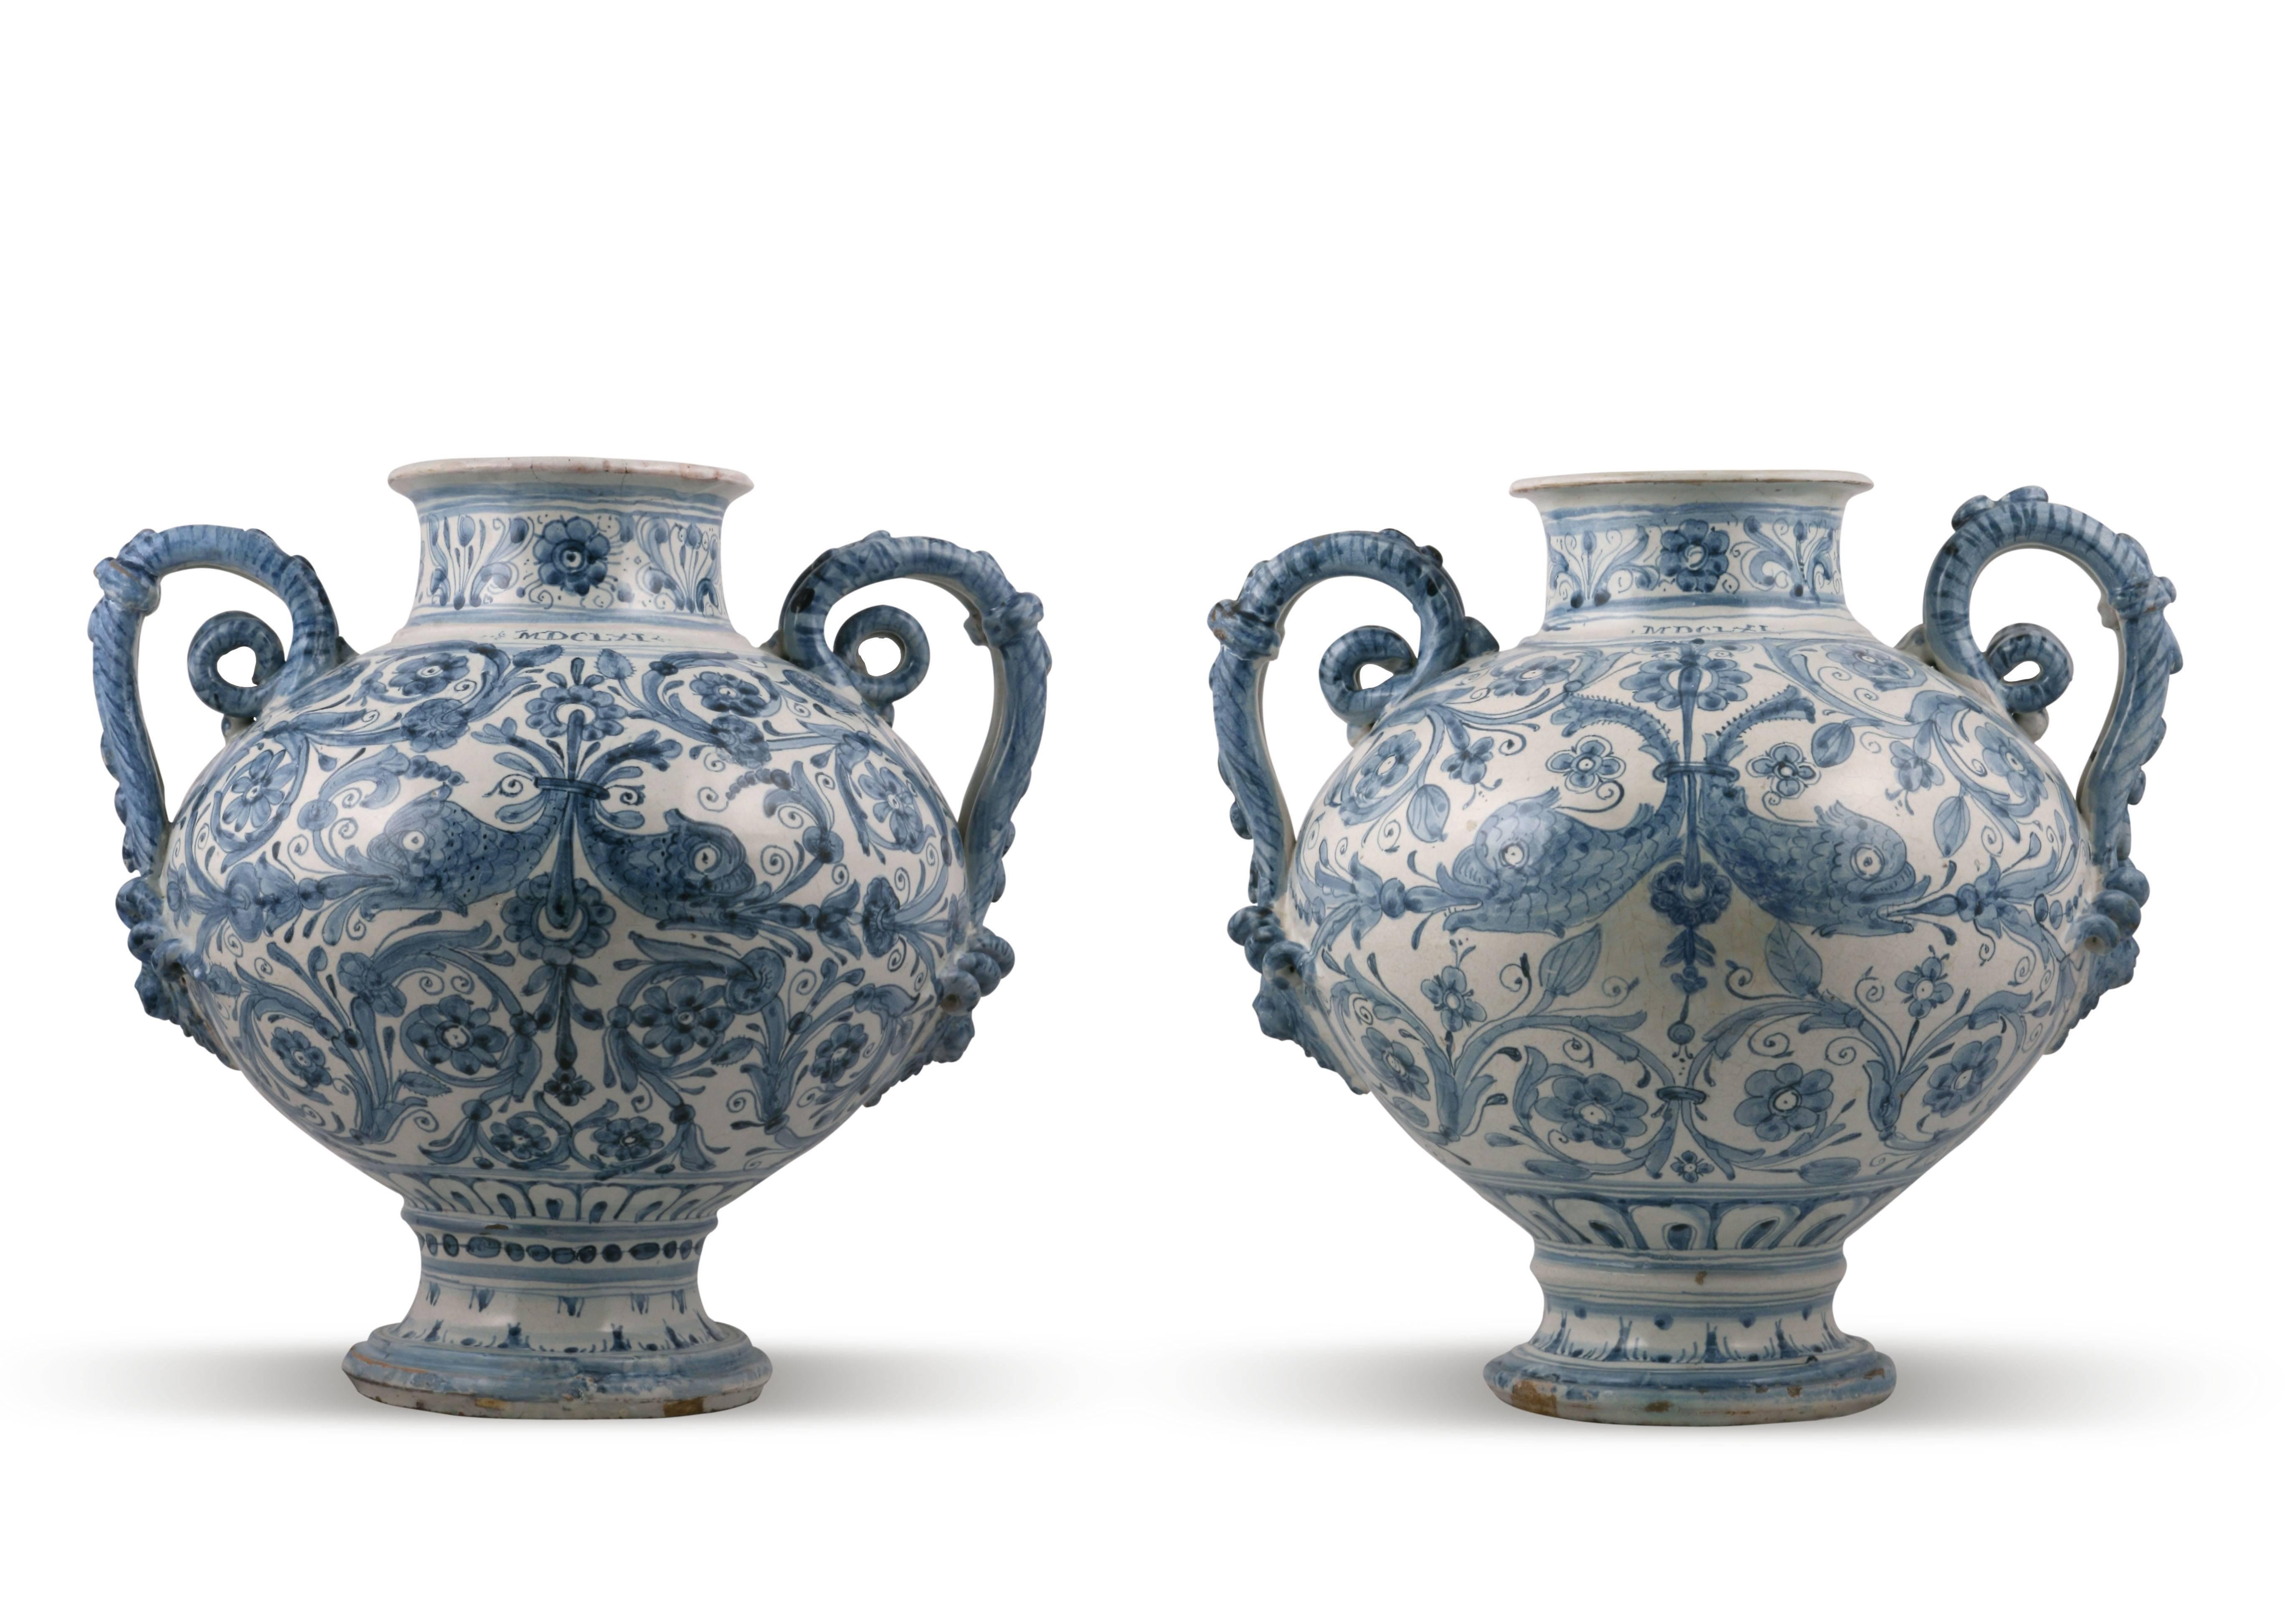 Louis XIV Sienne, Pair of Vases in Faïence Dated 1661, Italy For Sale